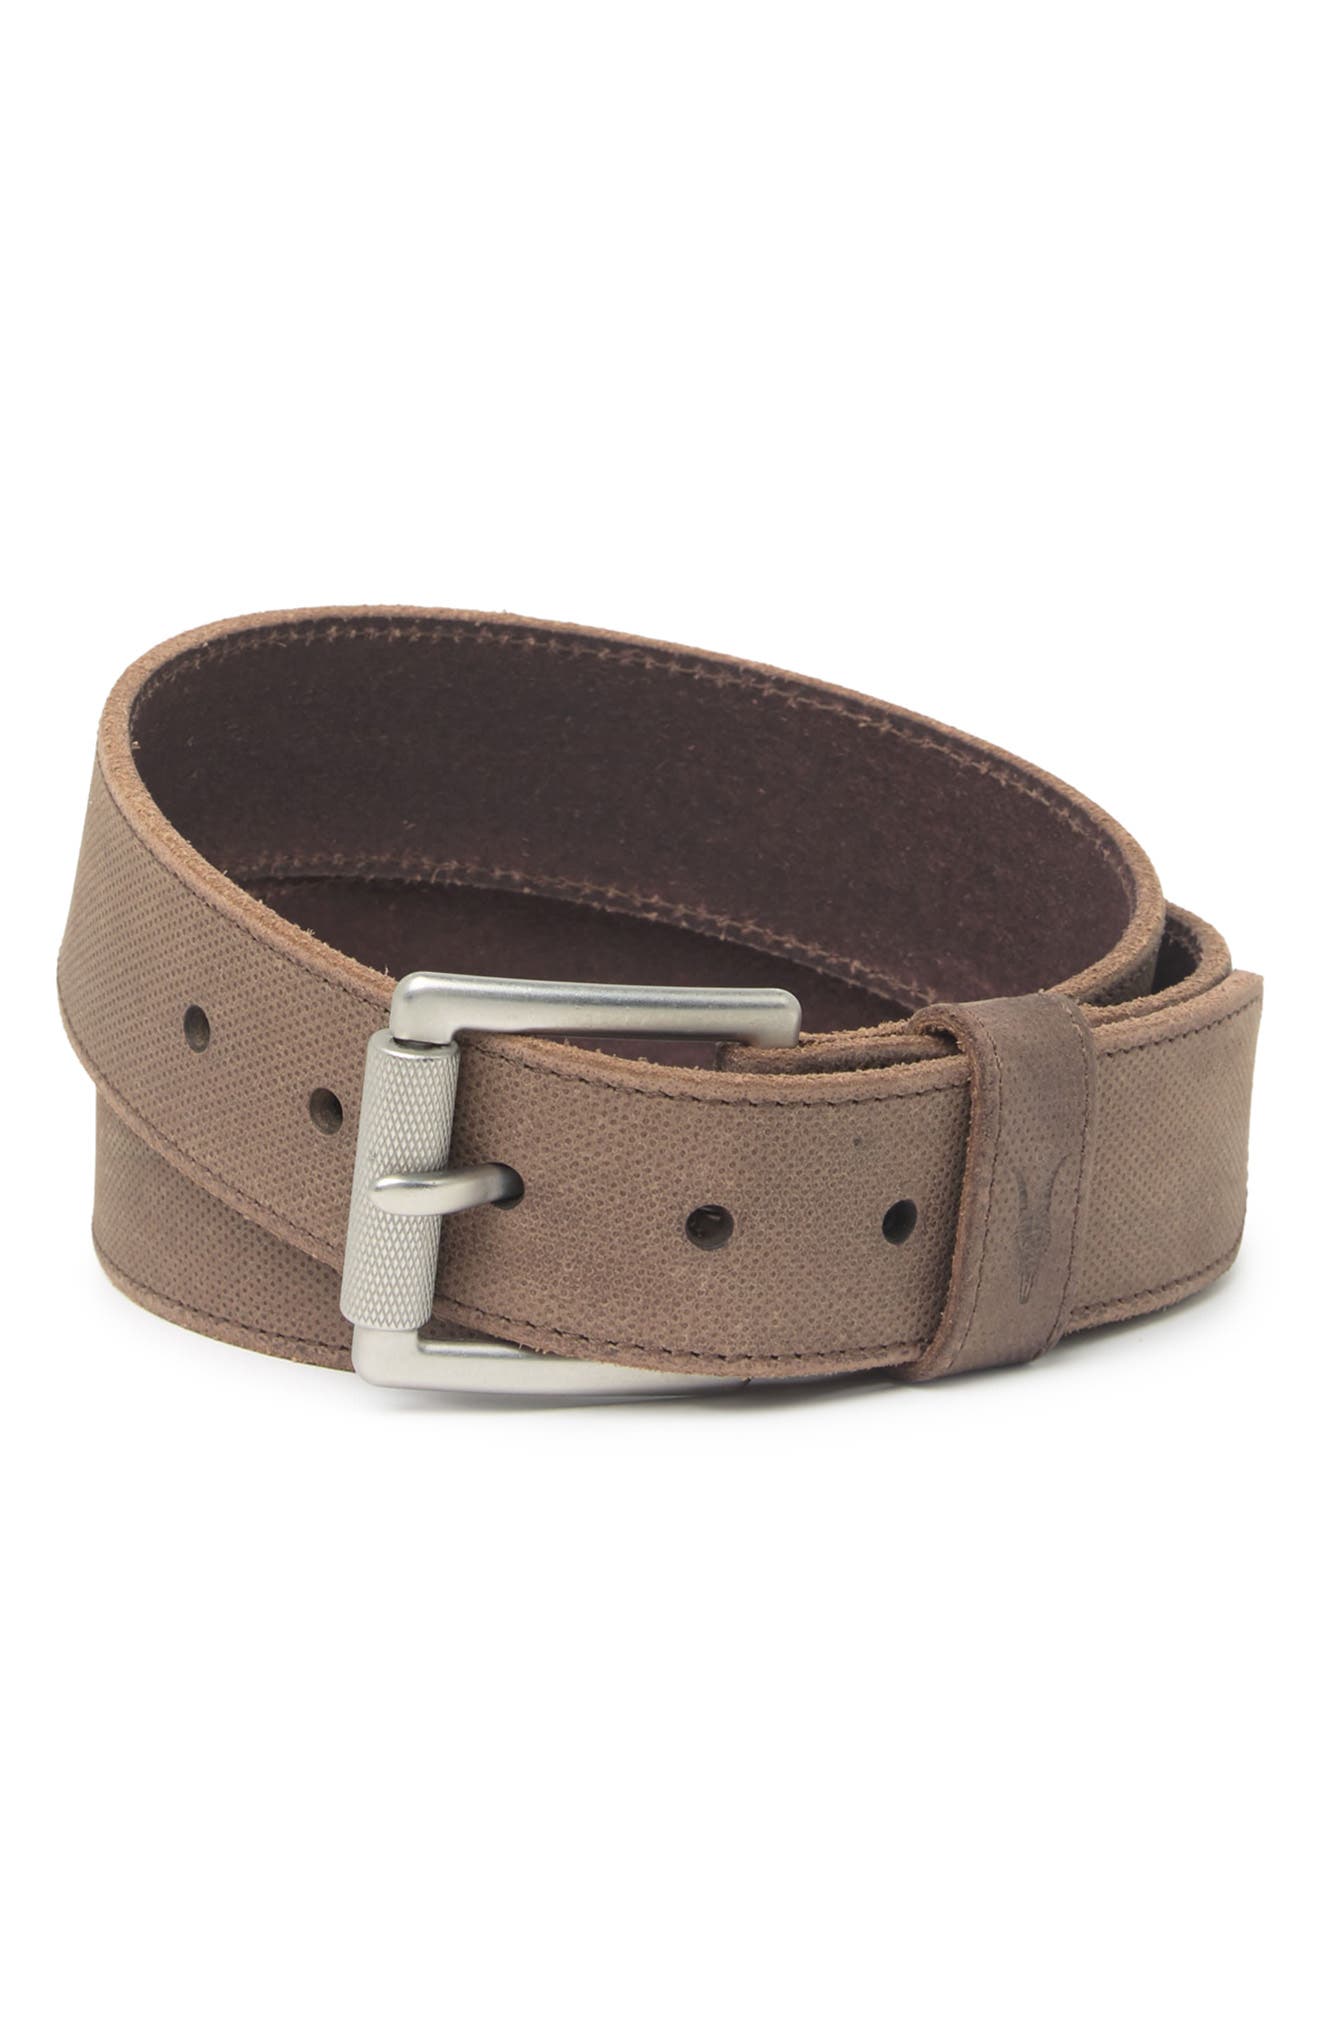 Allsaints Textured Leather Belt In Taupe